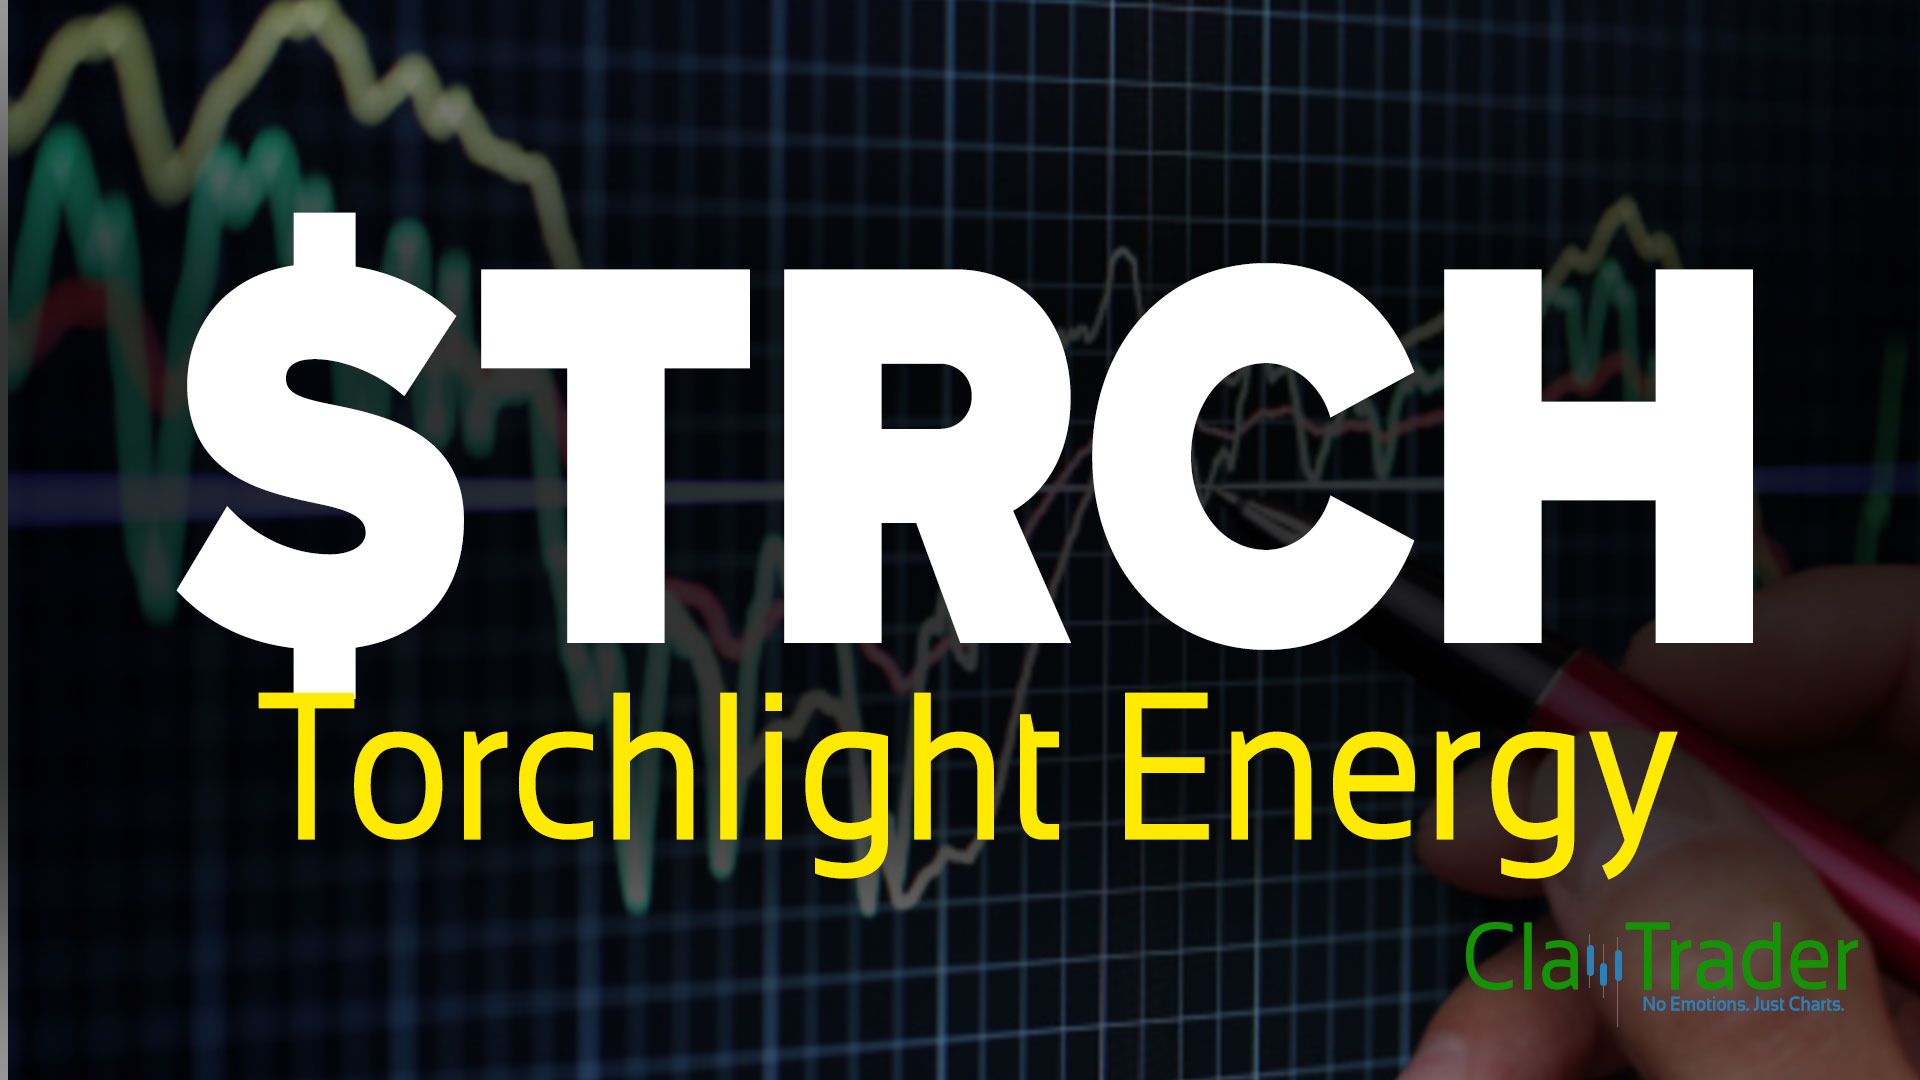 torchlight energy dividend payout